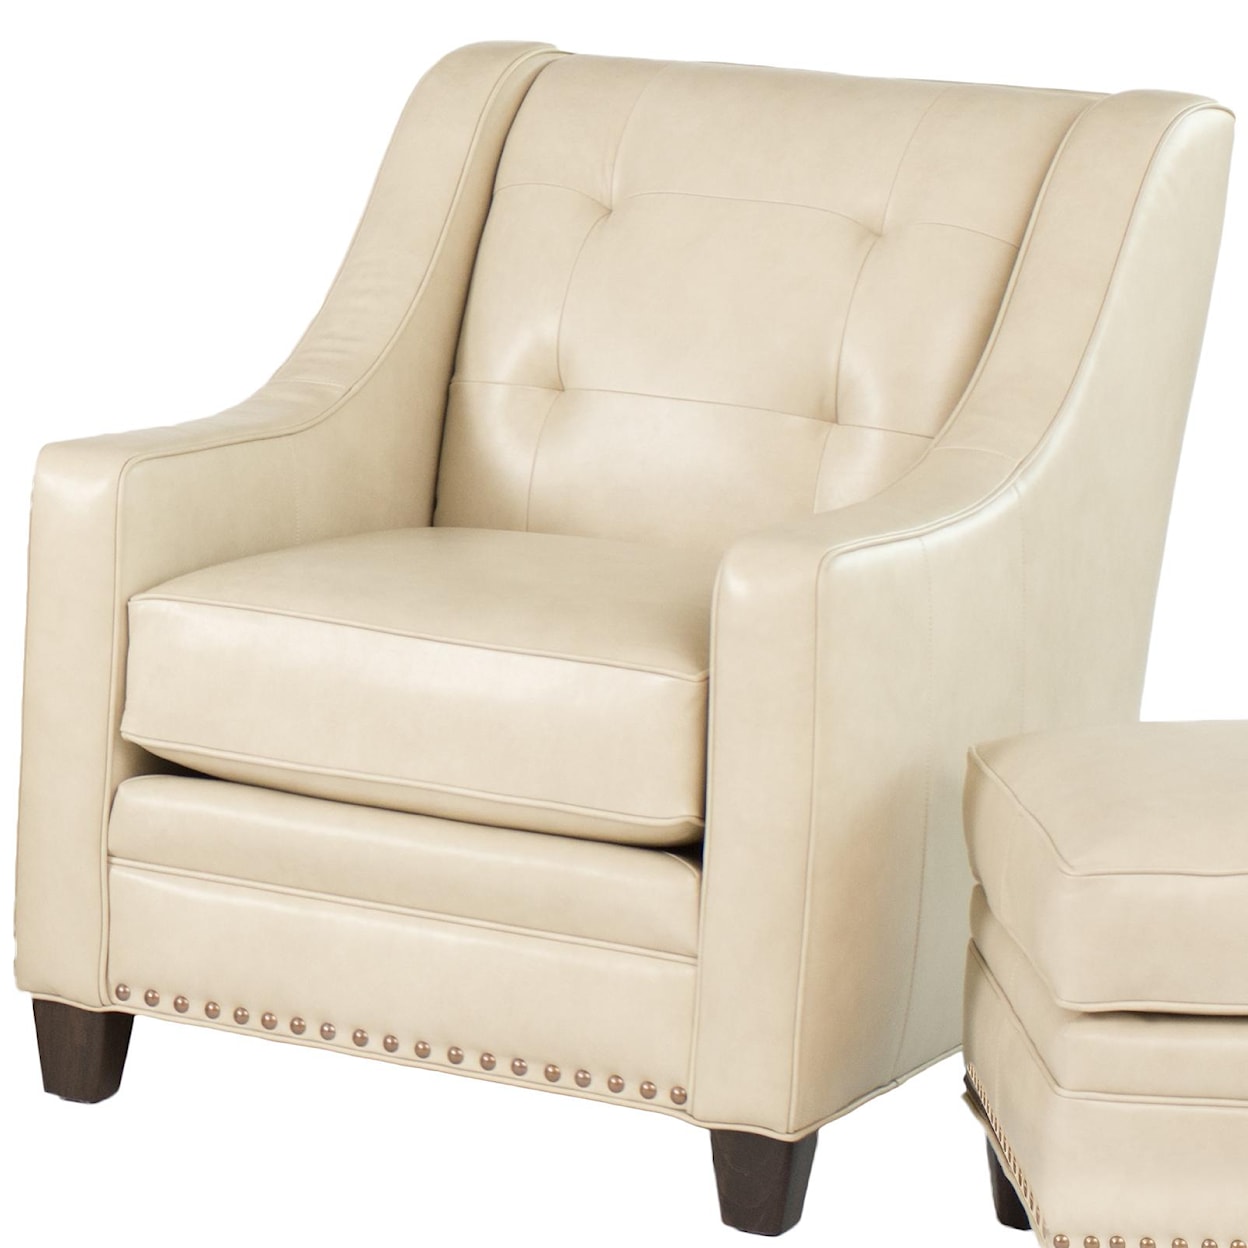 Smith Brothers 203L Transitional Stationary Chair 